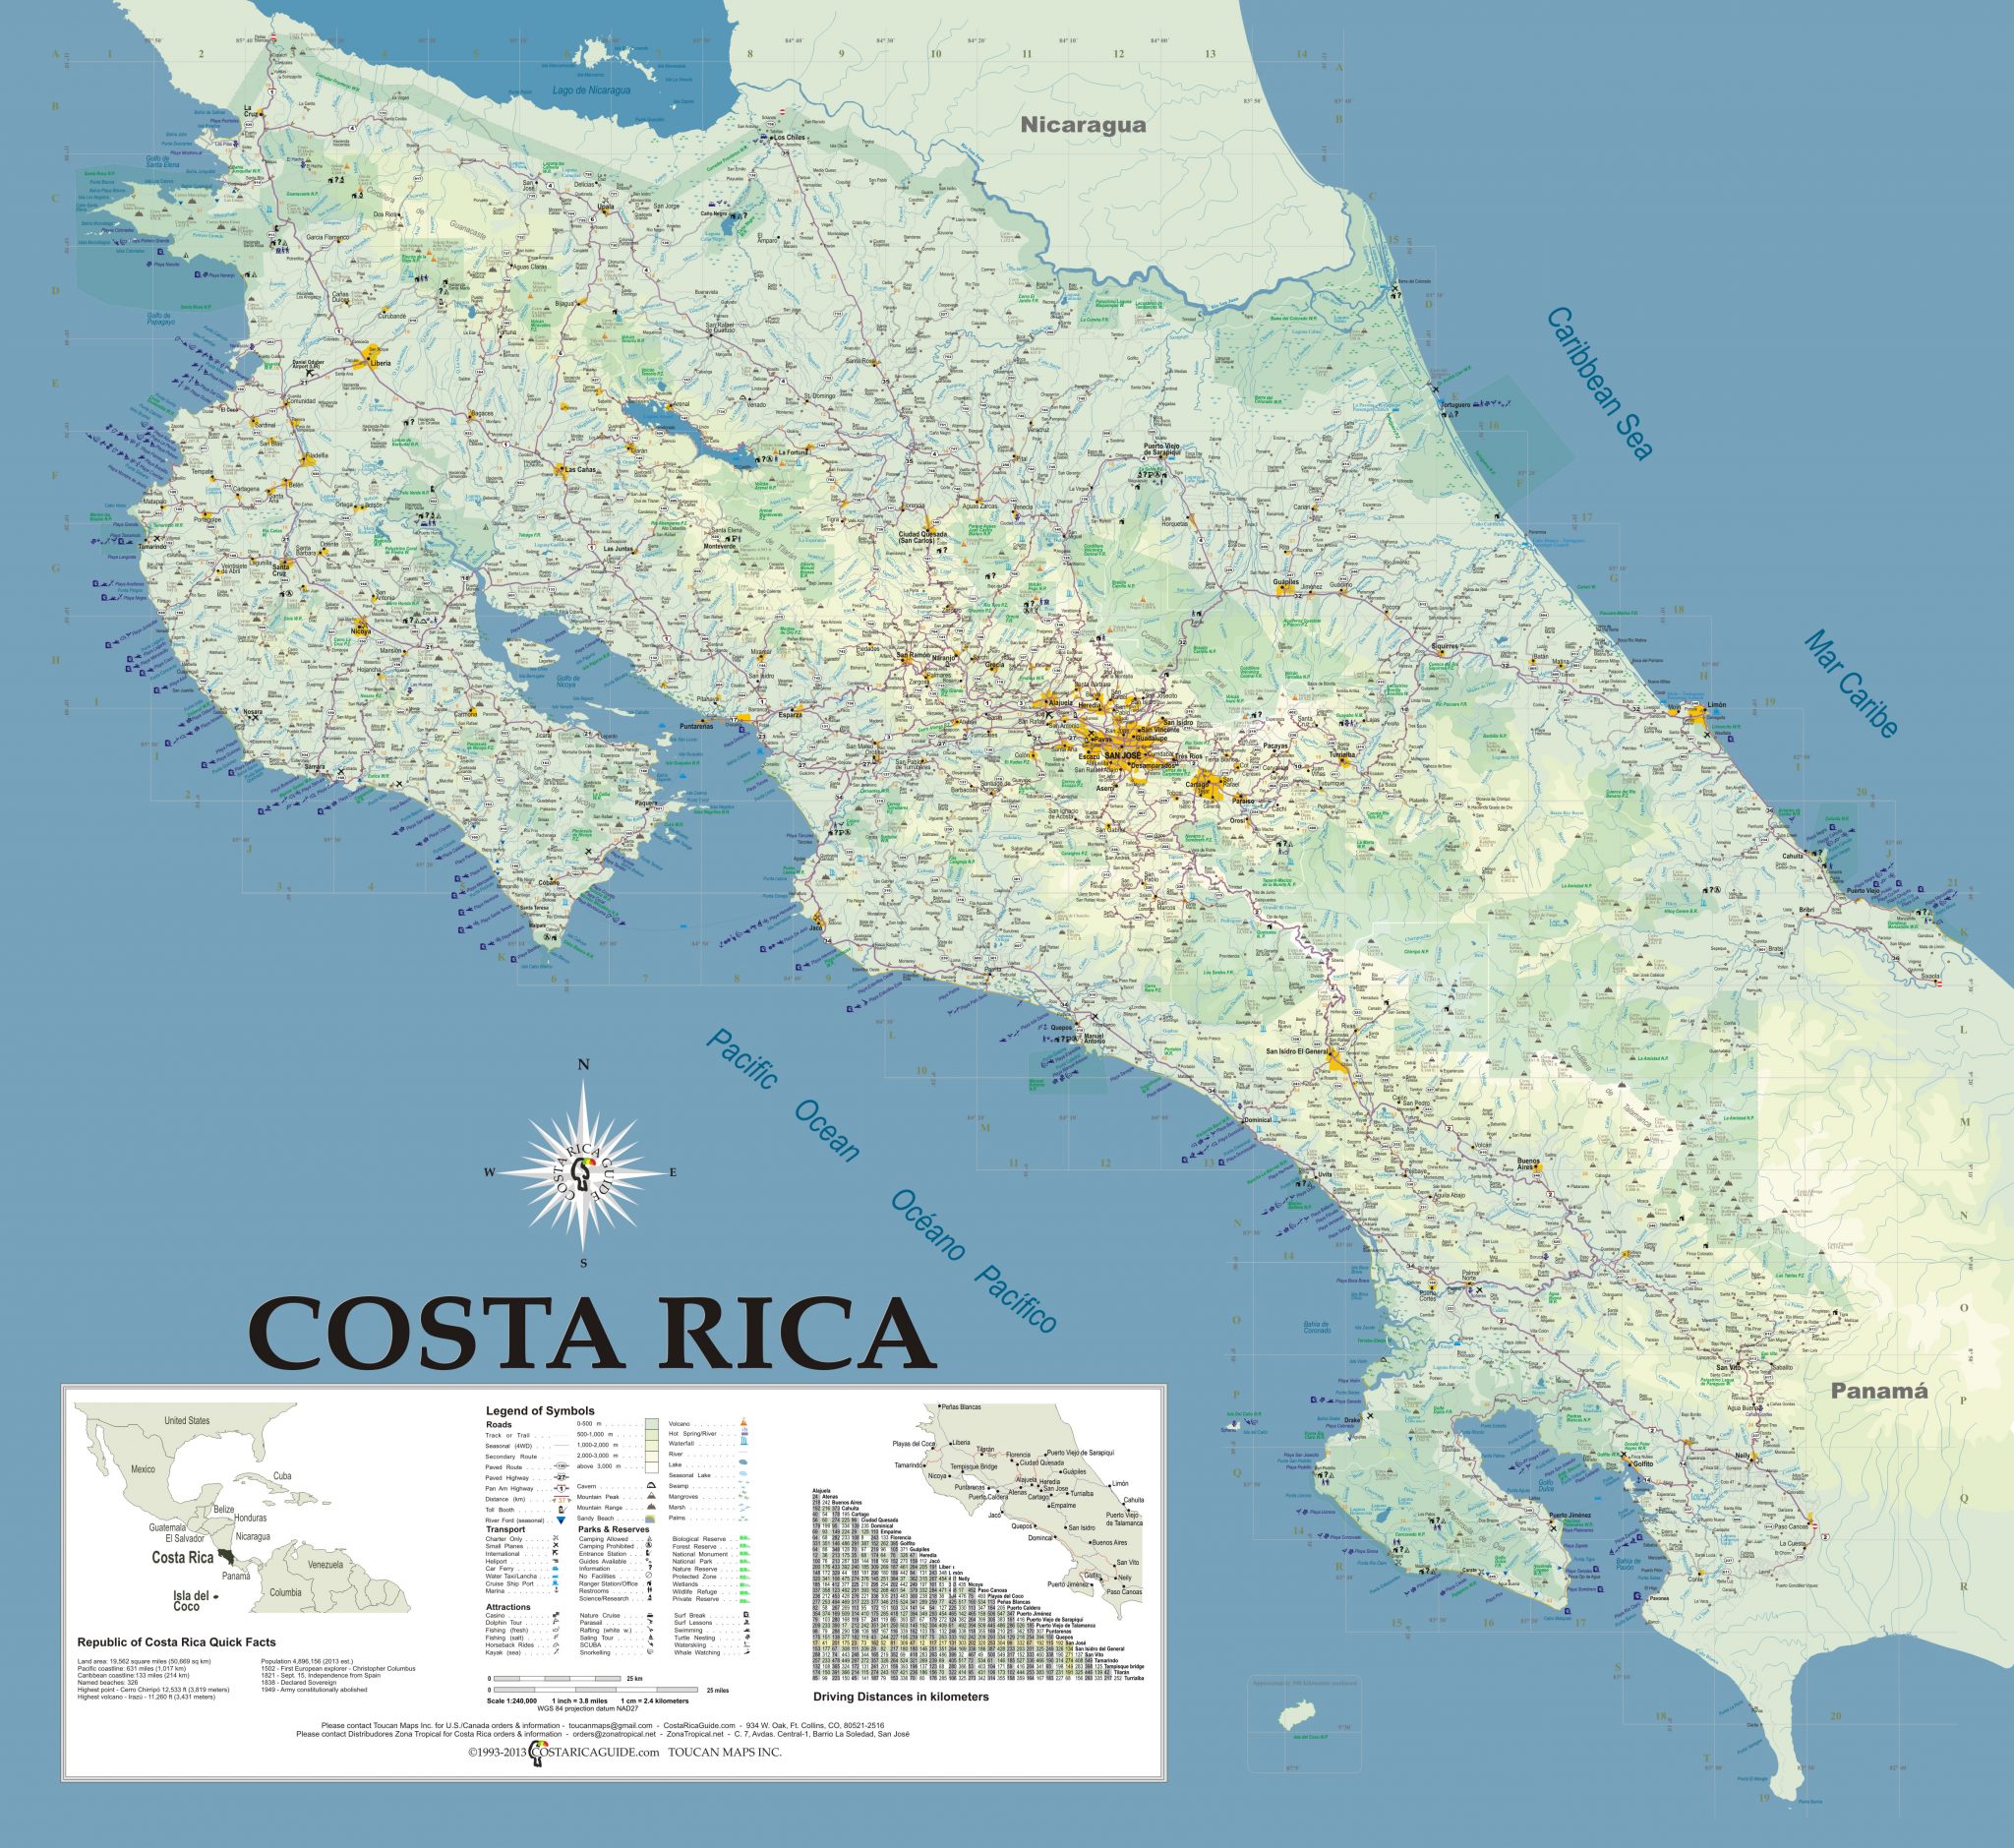 Wall Map of Costa Rica - 27.5 square feet (66 inches wide by 60 inches high). 18 pt vinyl using a state of the art ecoFRIENDLY wide format printer with a unique six color process utilizing water-based latex inks that are non-flammable, meet GREENGUARD criteria and do not produce hazardous air pollutants or waste. The brilliant full color prints are nearly tear proof, water resistant, fade resistant, and suitable for framing. The map itself relies on the same gps data used to create and update the Waterproof Travel Roadmap of Costa Rica.